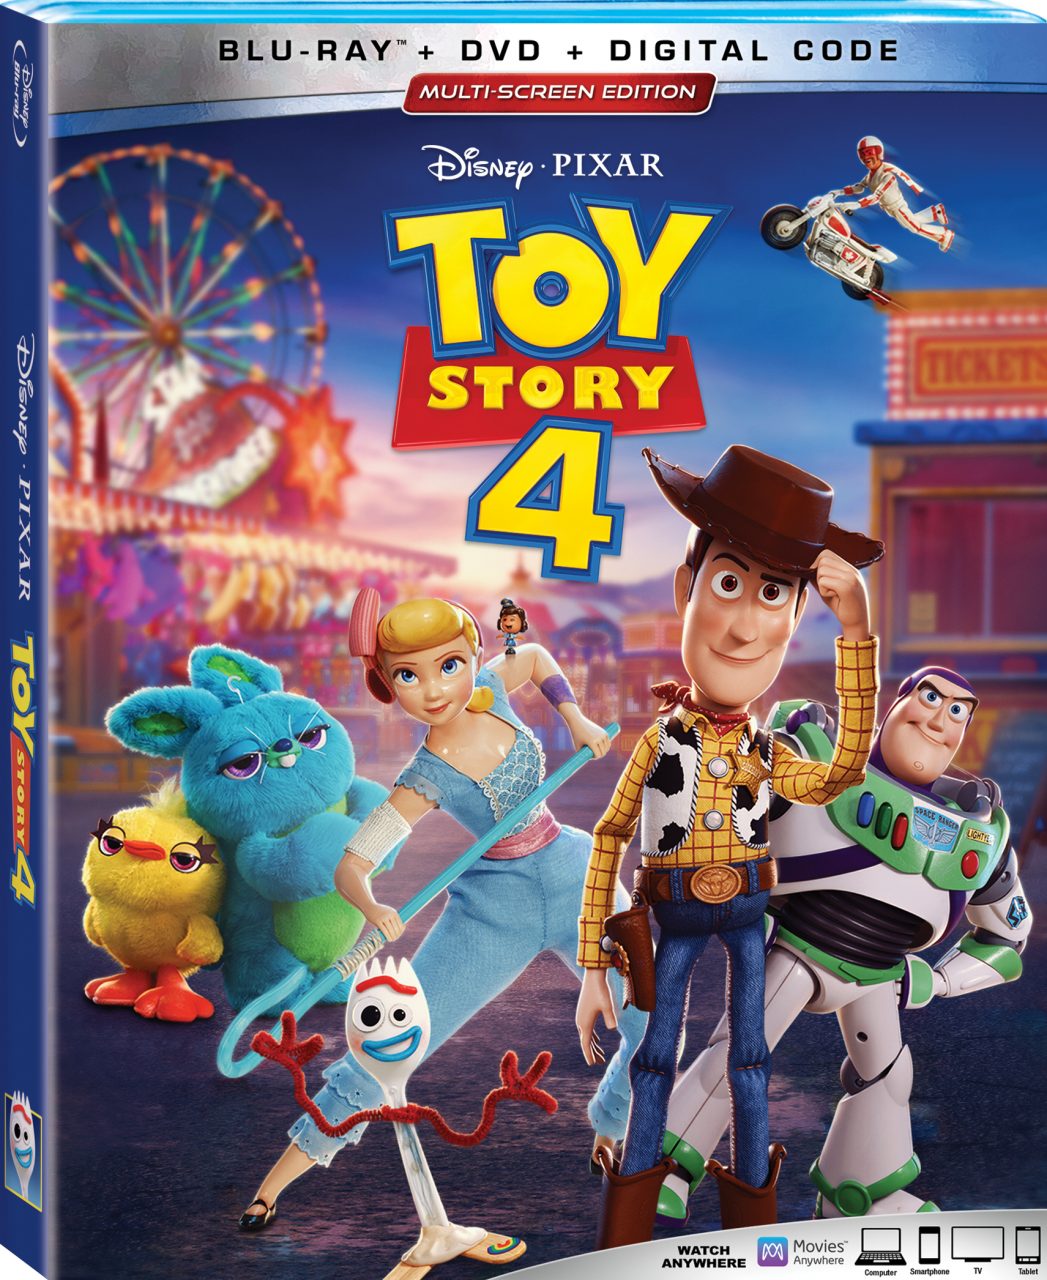 Toy Story 4 Blu-Ray Combo Pack cover (Walt Disney Studios Home Entertainment)